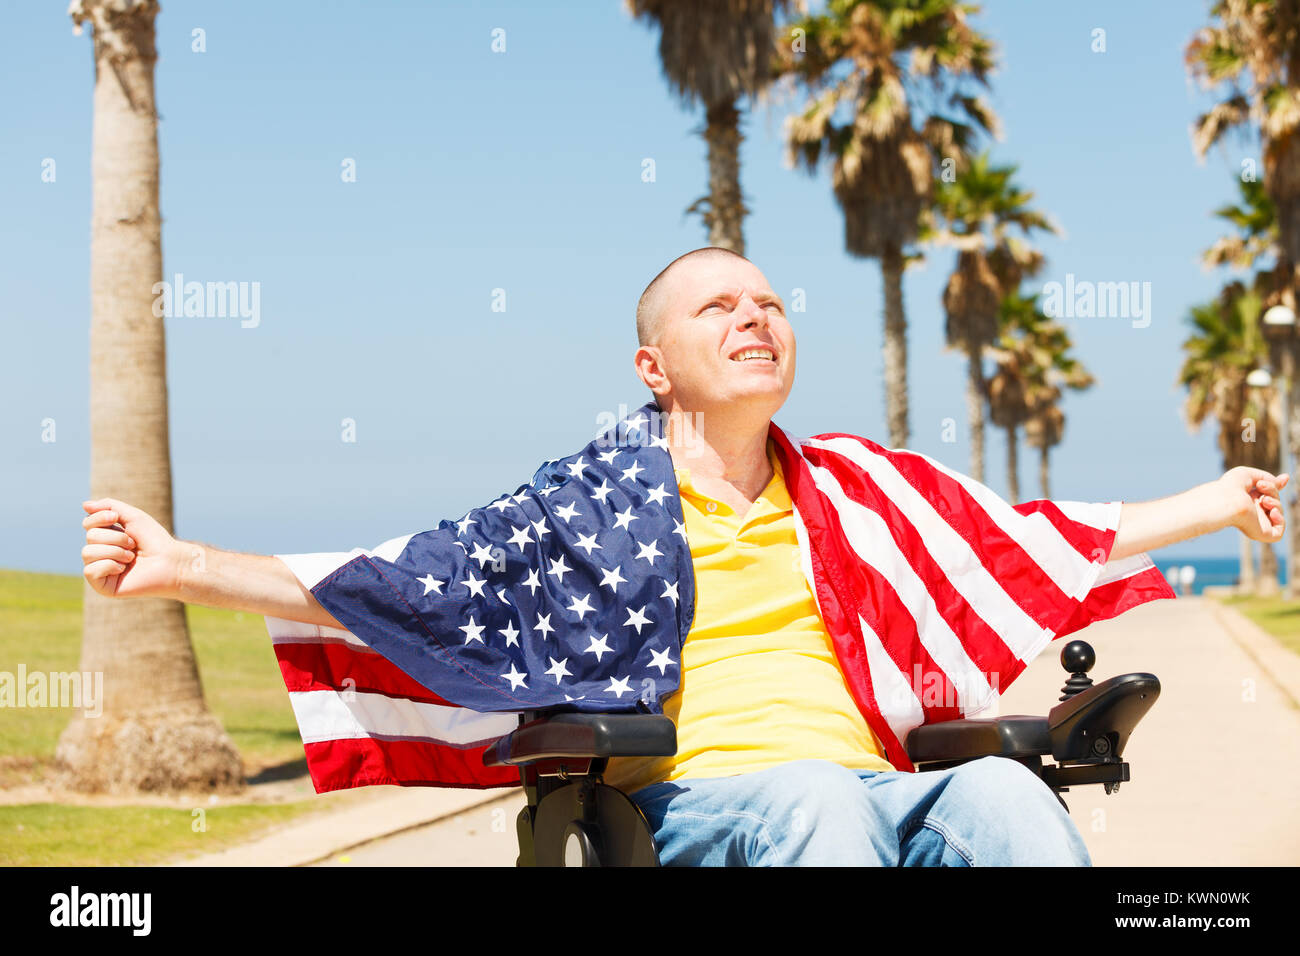 Disabled man sitting in wheelchair with flag of USA showing freedom Stock Photo